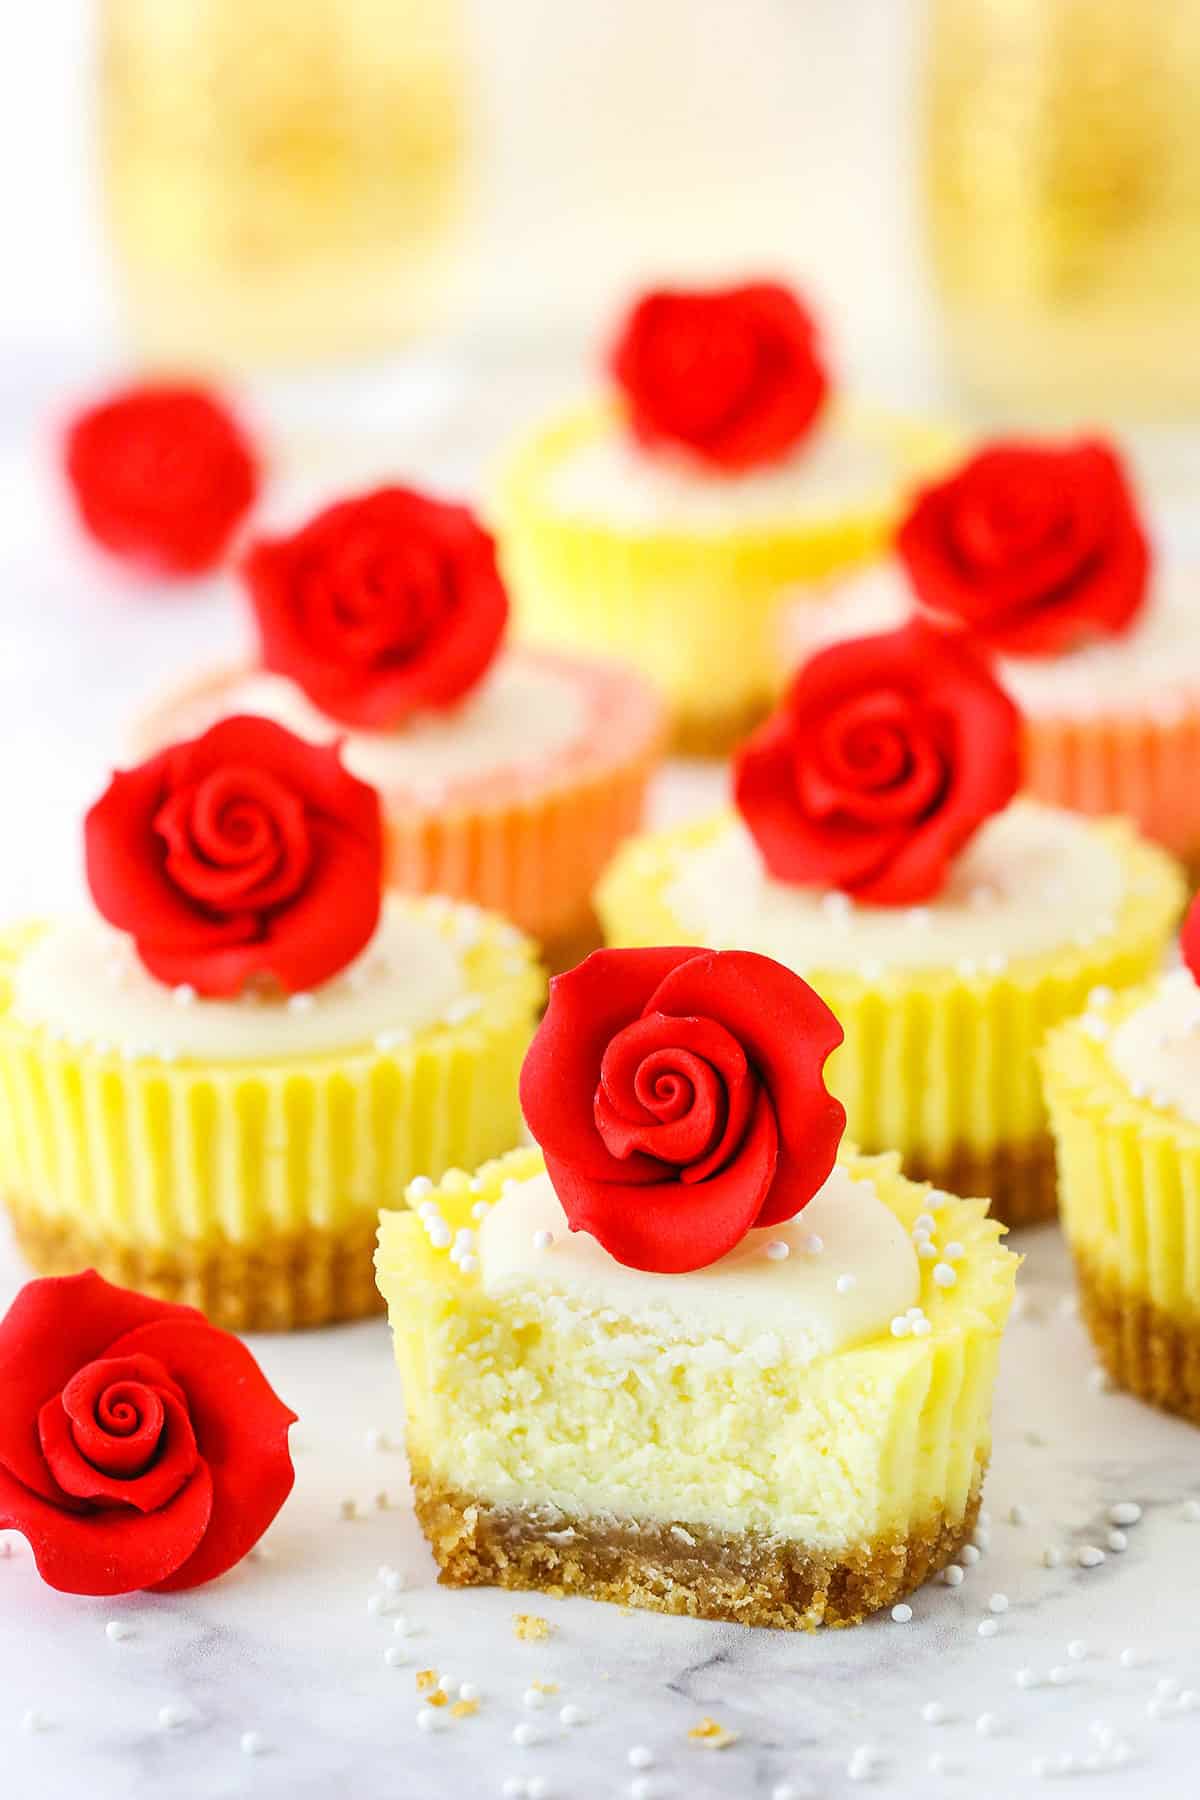 Mini Rose Cheesecakes topped with white icing and a red rose with the front Mini Rose Cheesecake missing a bite on a white marble table